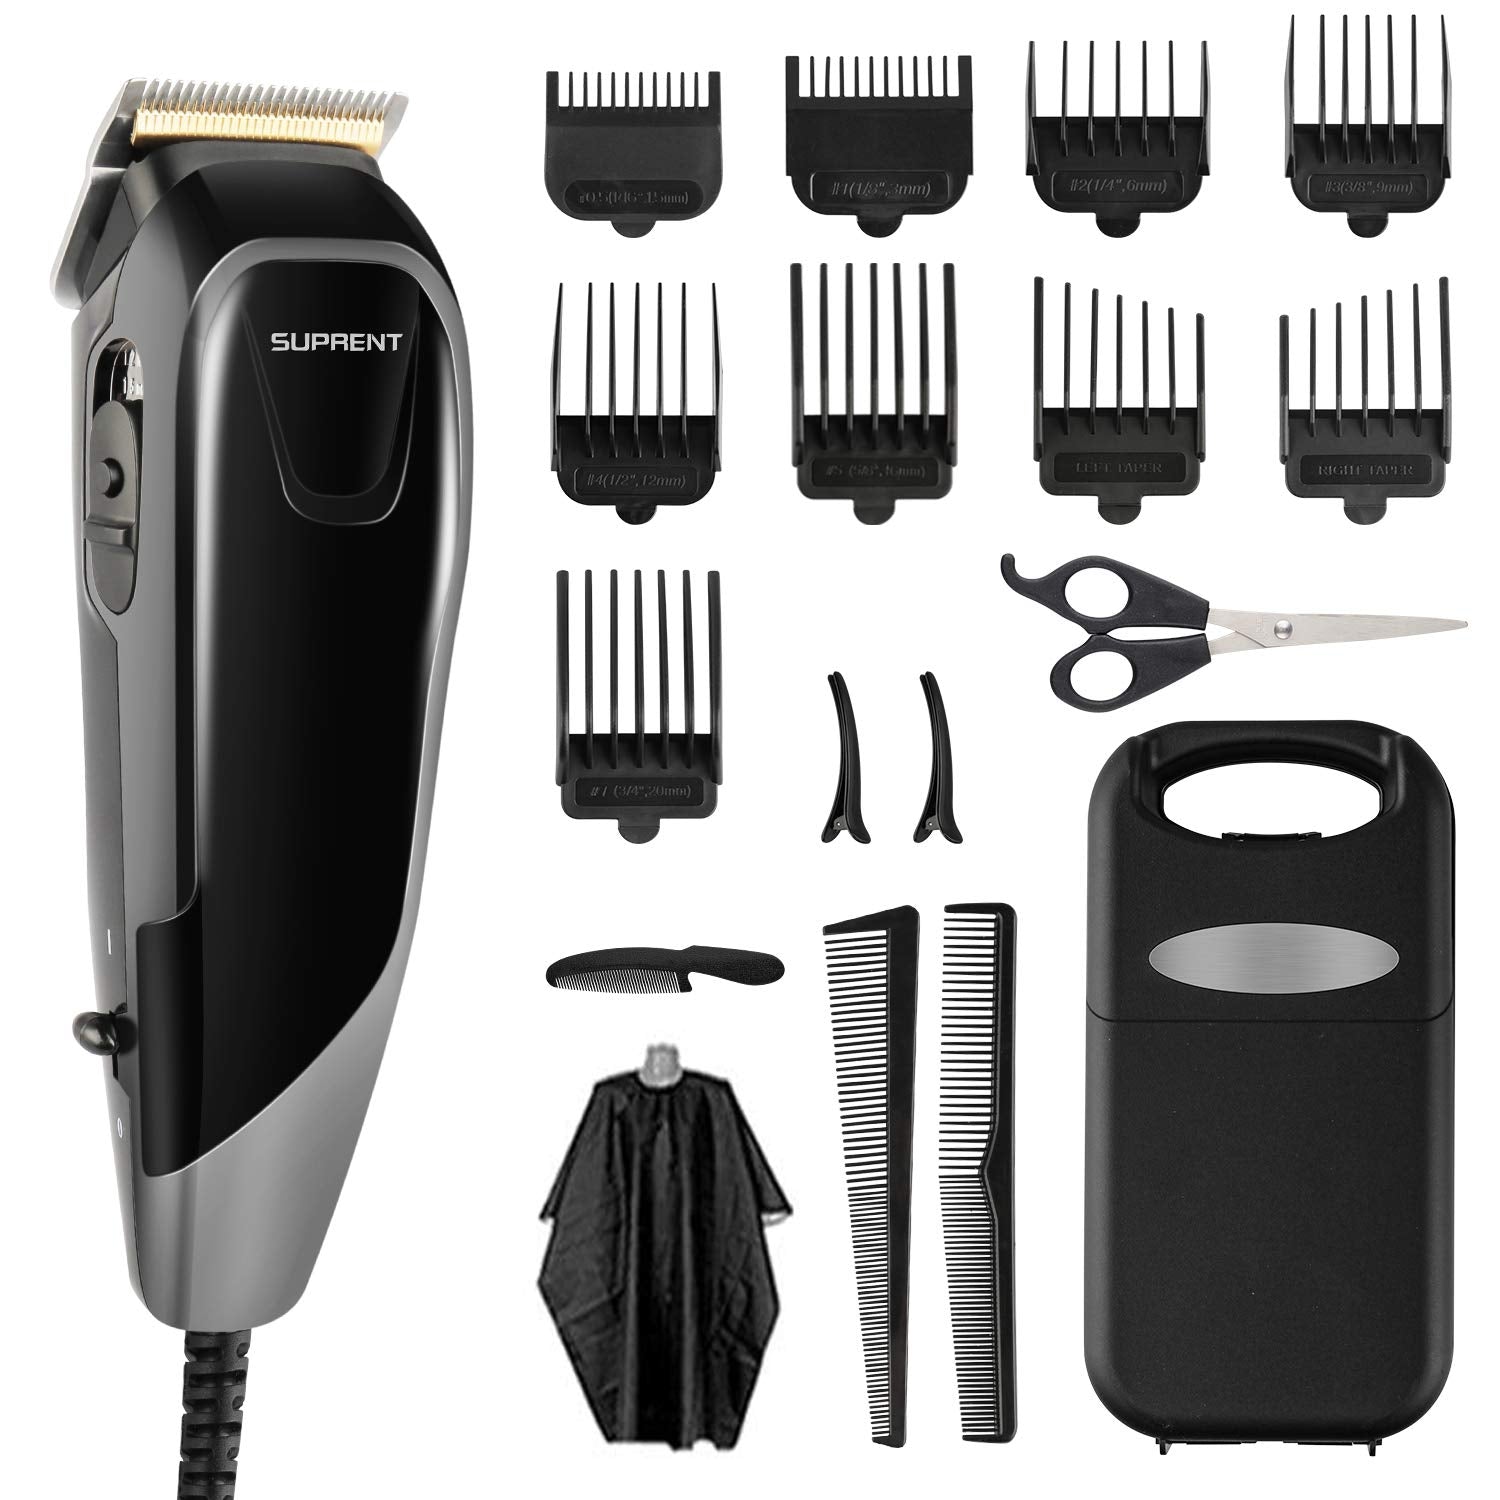 Suprent Corded Hair Clippers for Men, 21-piece Hair Cutting Kit with 27 Cutting Length, 10 Guide Combs, Scissor, Storage Case